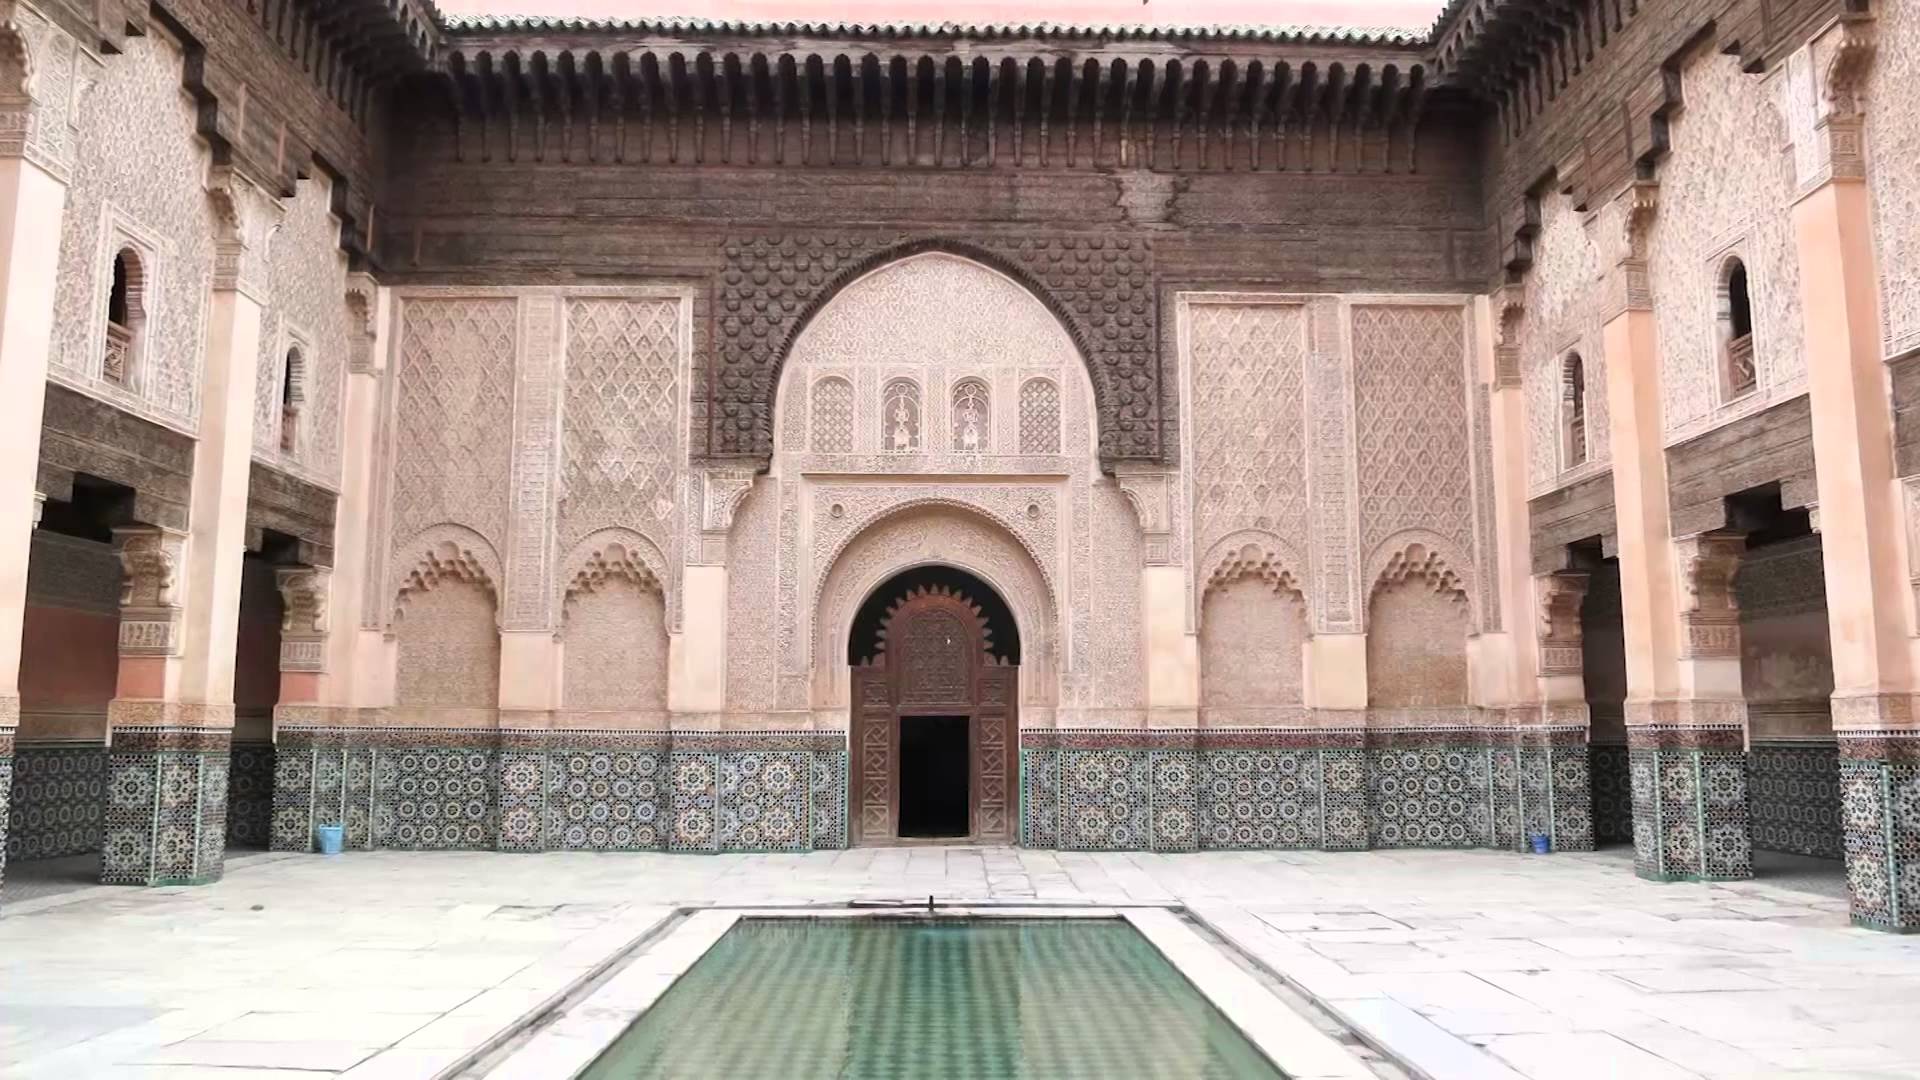 Morocco Architecture: What to See in Morocco's Imperial Cities - YouTube